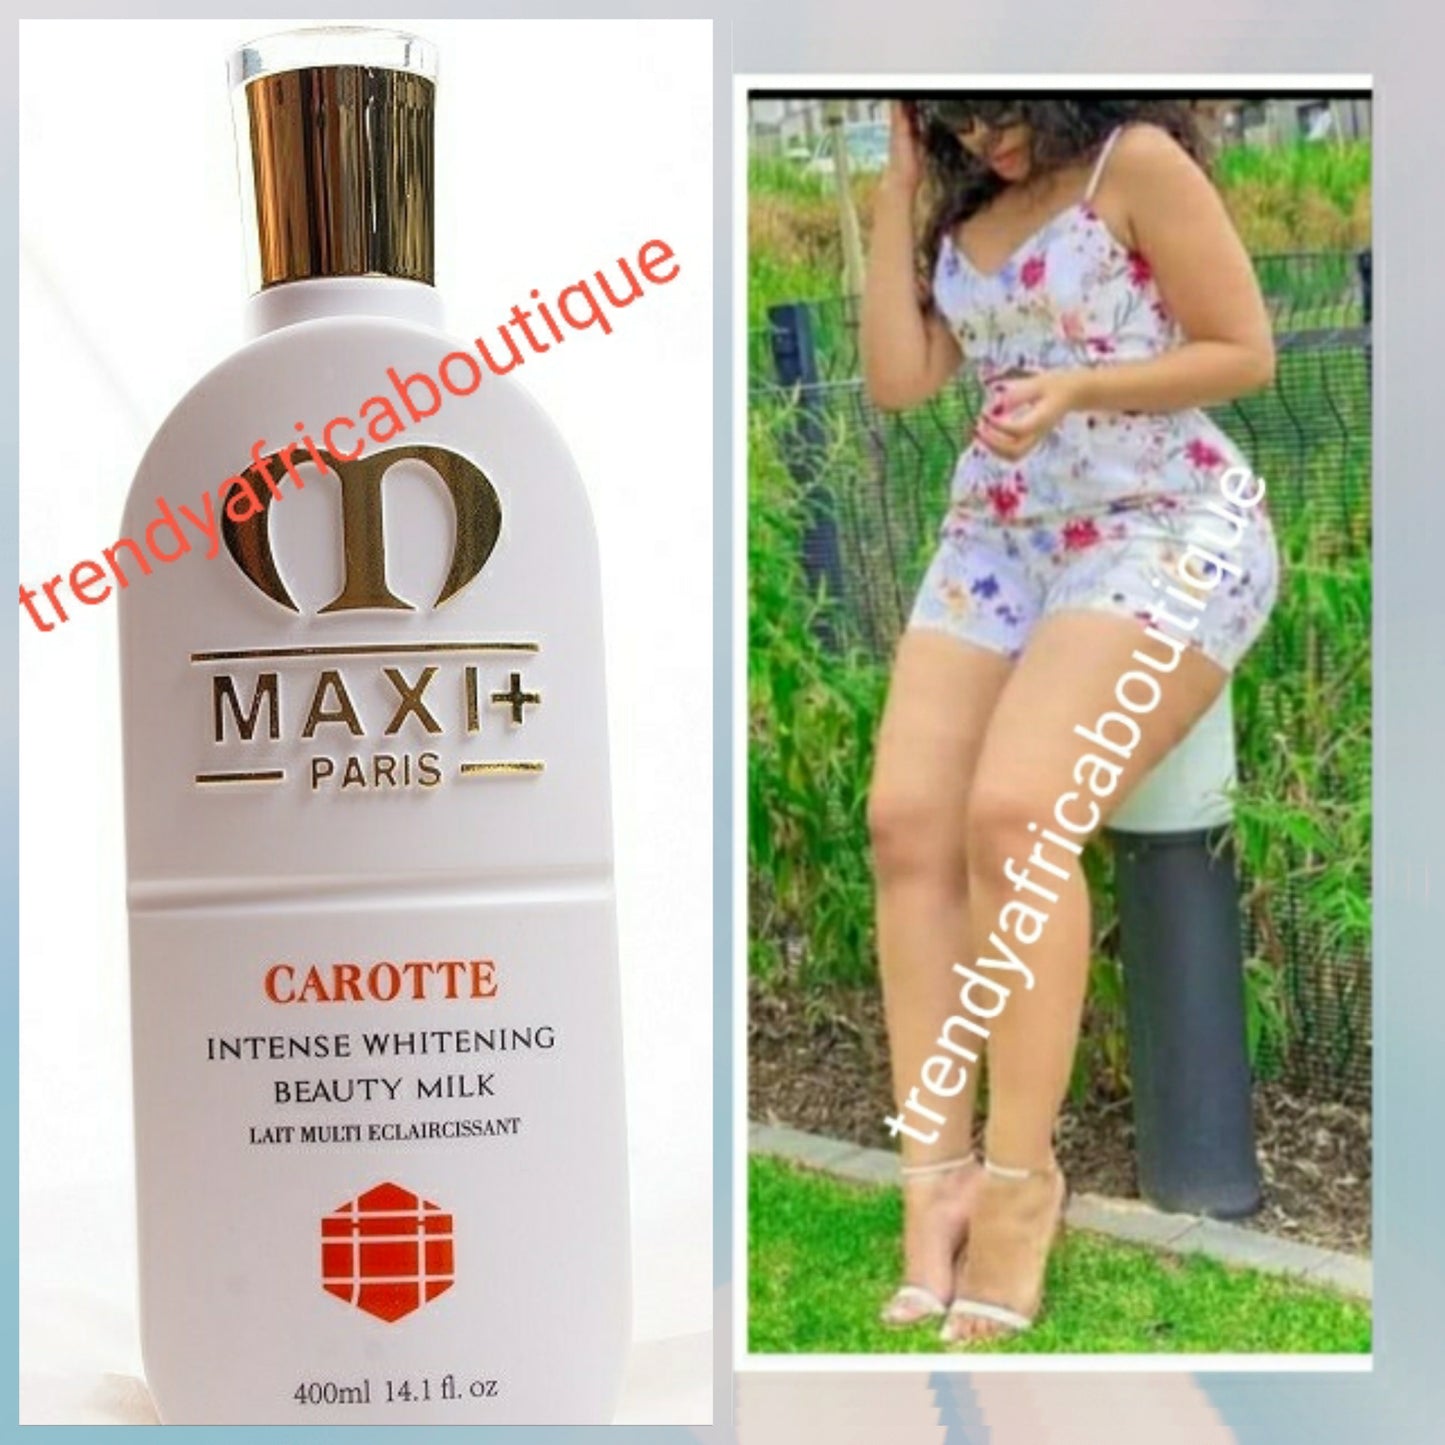 Maxi+ carotte intense whitening beauty milk 400ml; fomulated to treat, whiten and glow your skin. Body lotion that gives you that beautiful yellow undertone!!